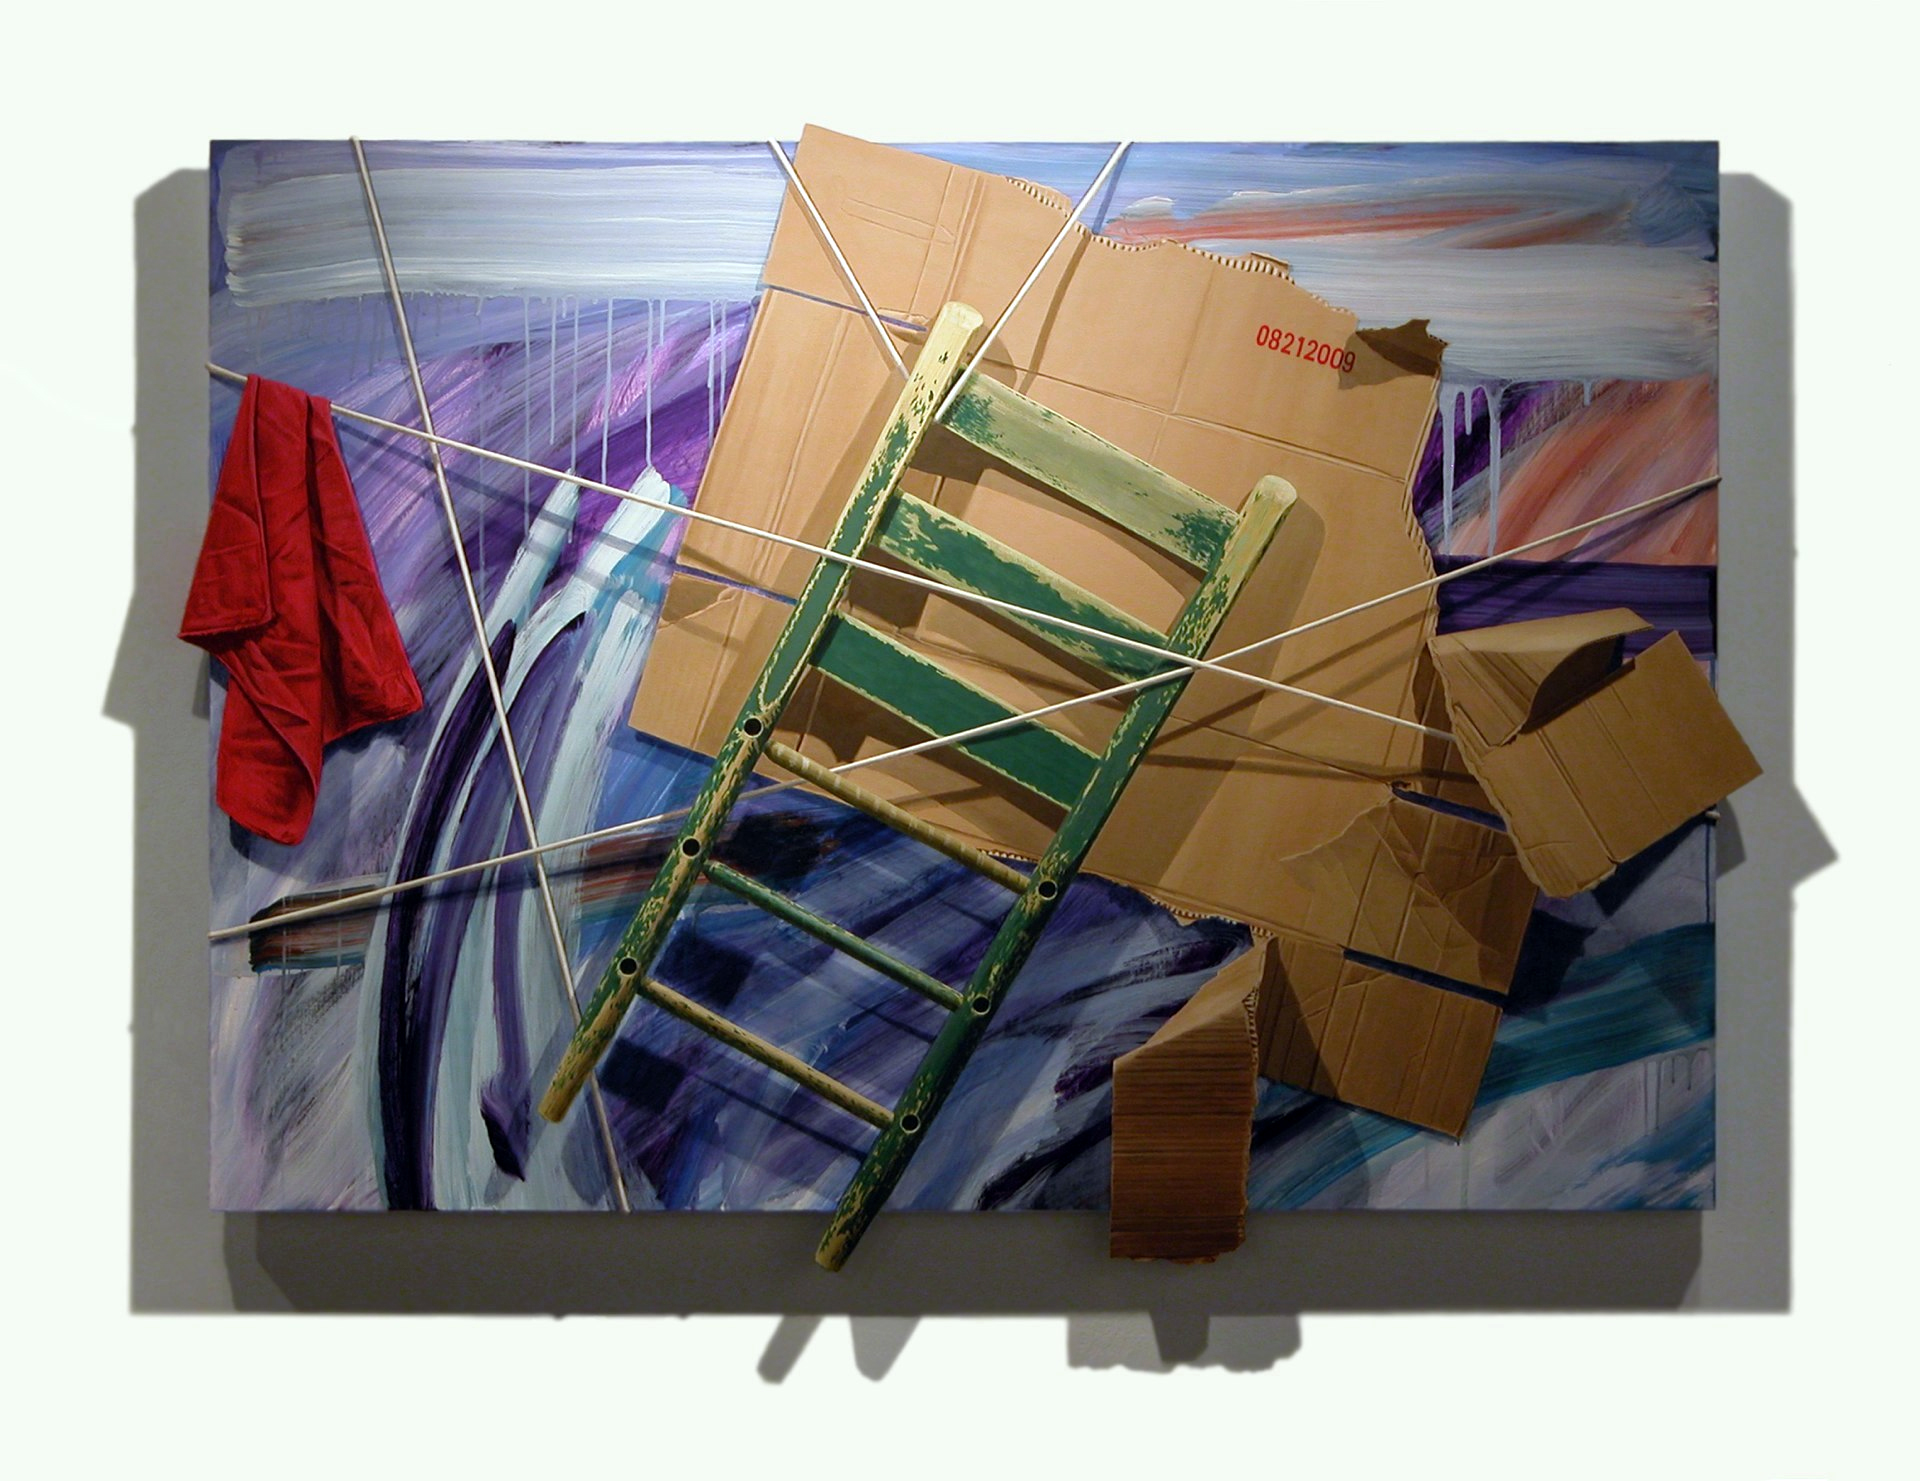 painting of back of chair strung against cardboard and red fabric